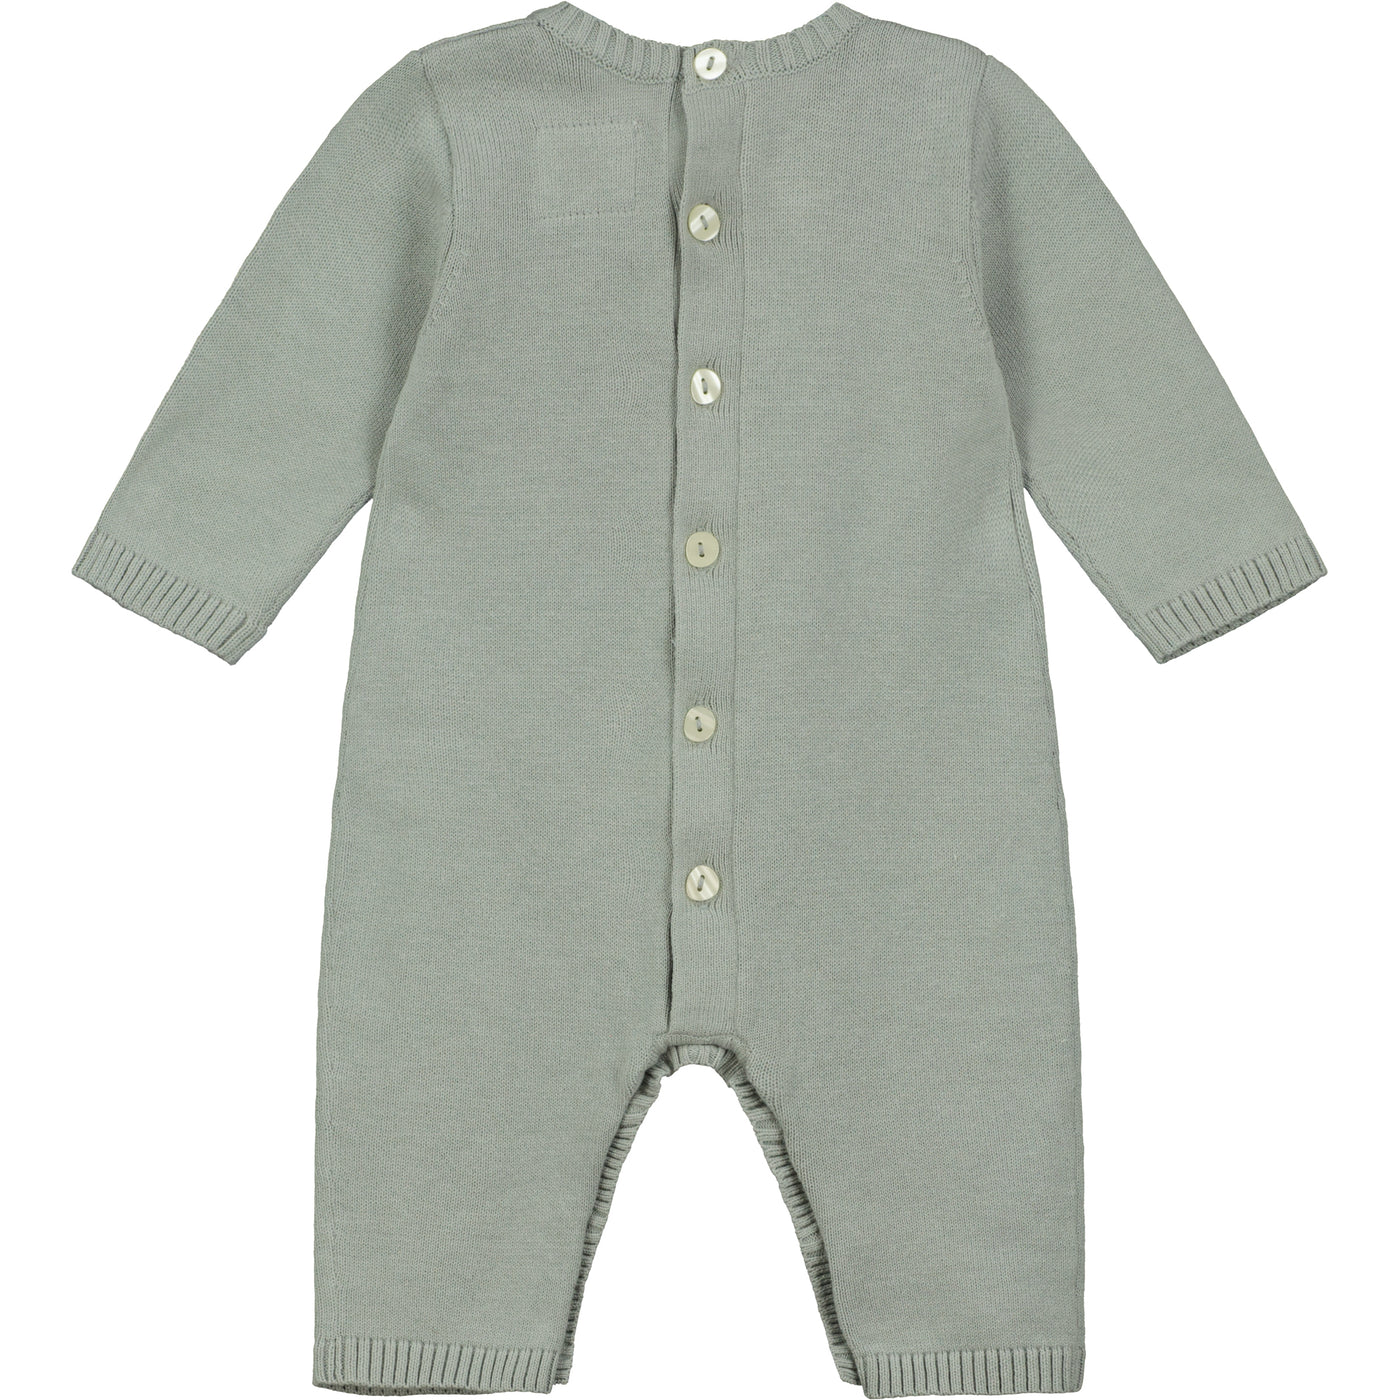 Easton Grey Knit Boys All-in-One